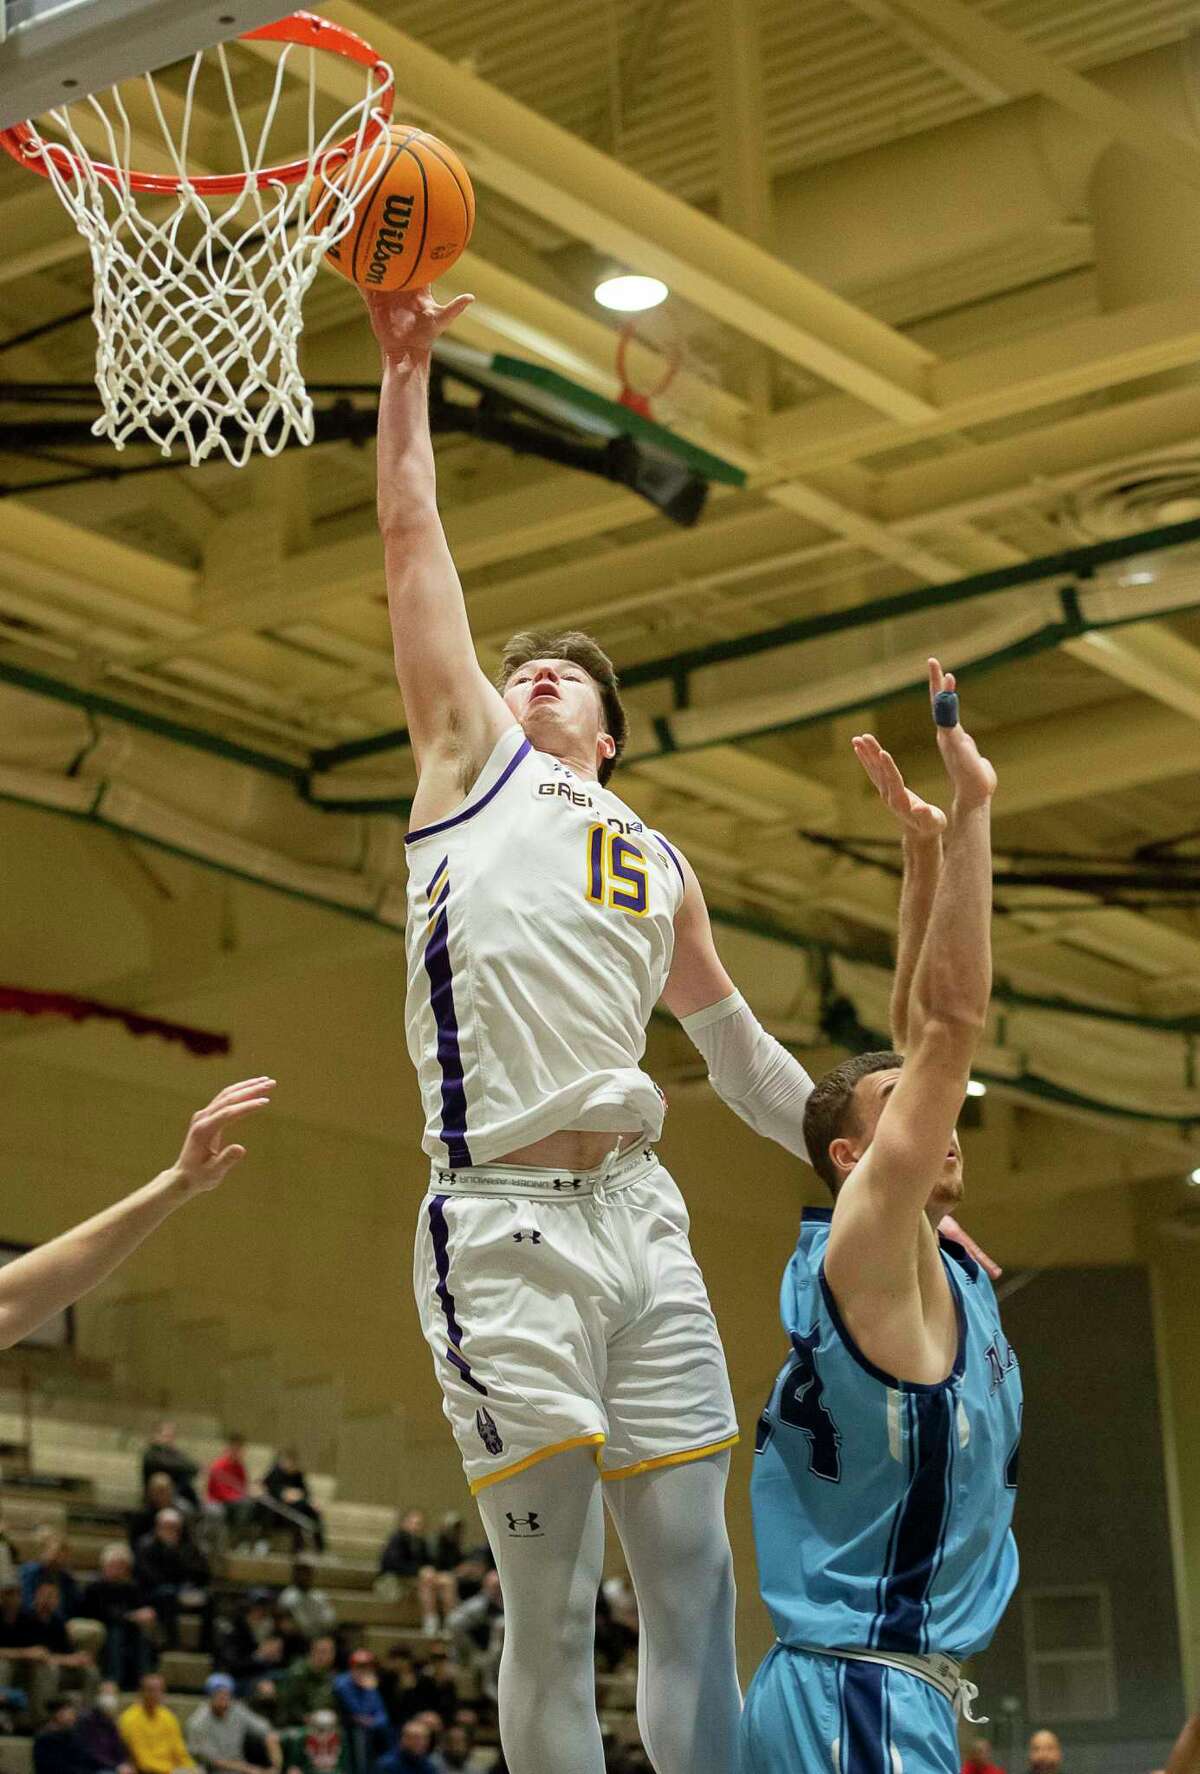 Albany’s Jonathan Beagle shoots the ball as he jumps over Maine’s Peter Filipovity during a game at McDonough Sports Complex in Troy, N.Y. on Saturday, Jan. 28, 2023. (Jenn March, Special to the Times Union)